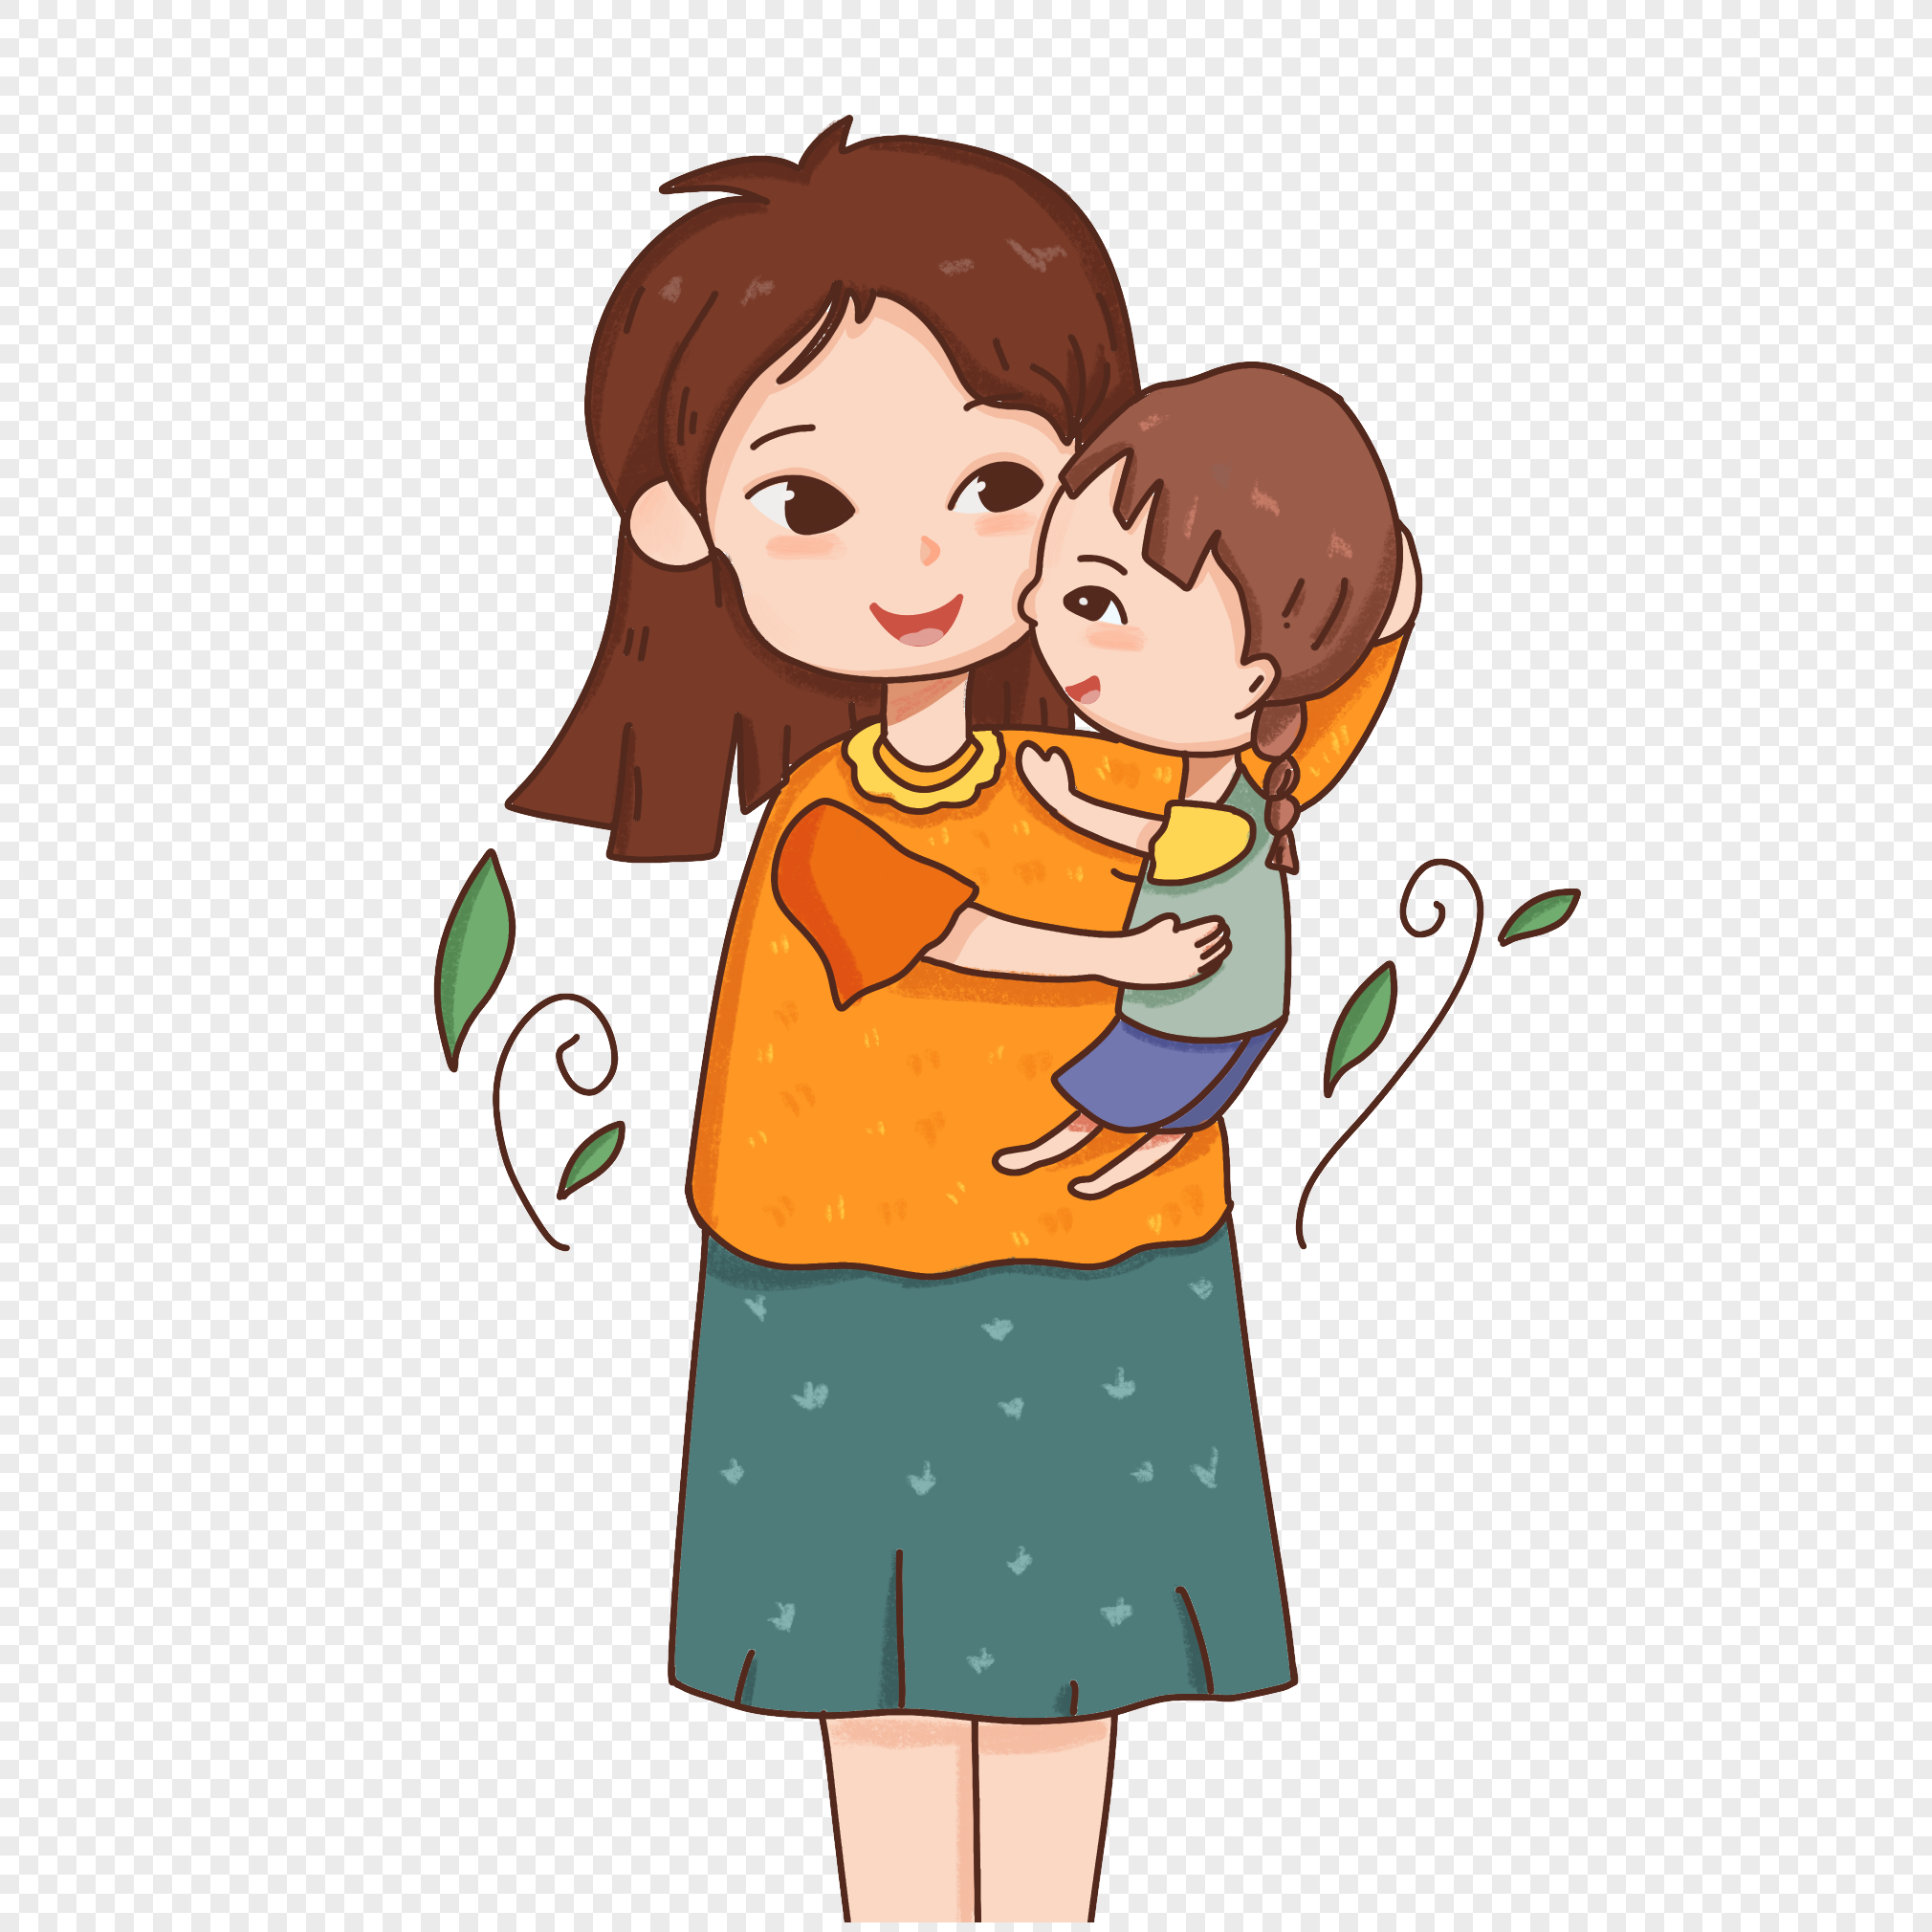 Hand Drawn Mother Holding Child PNG Transparent Image And Clipart Image ...